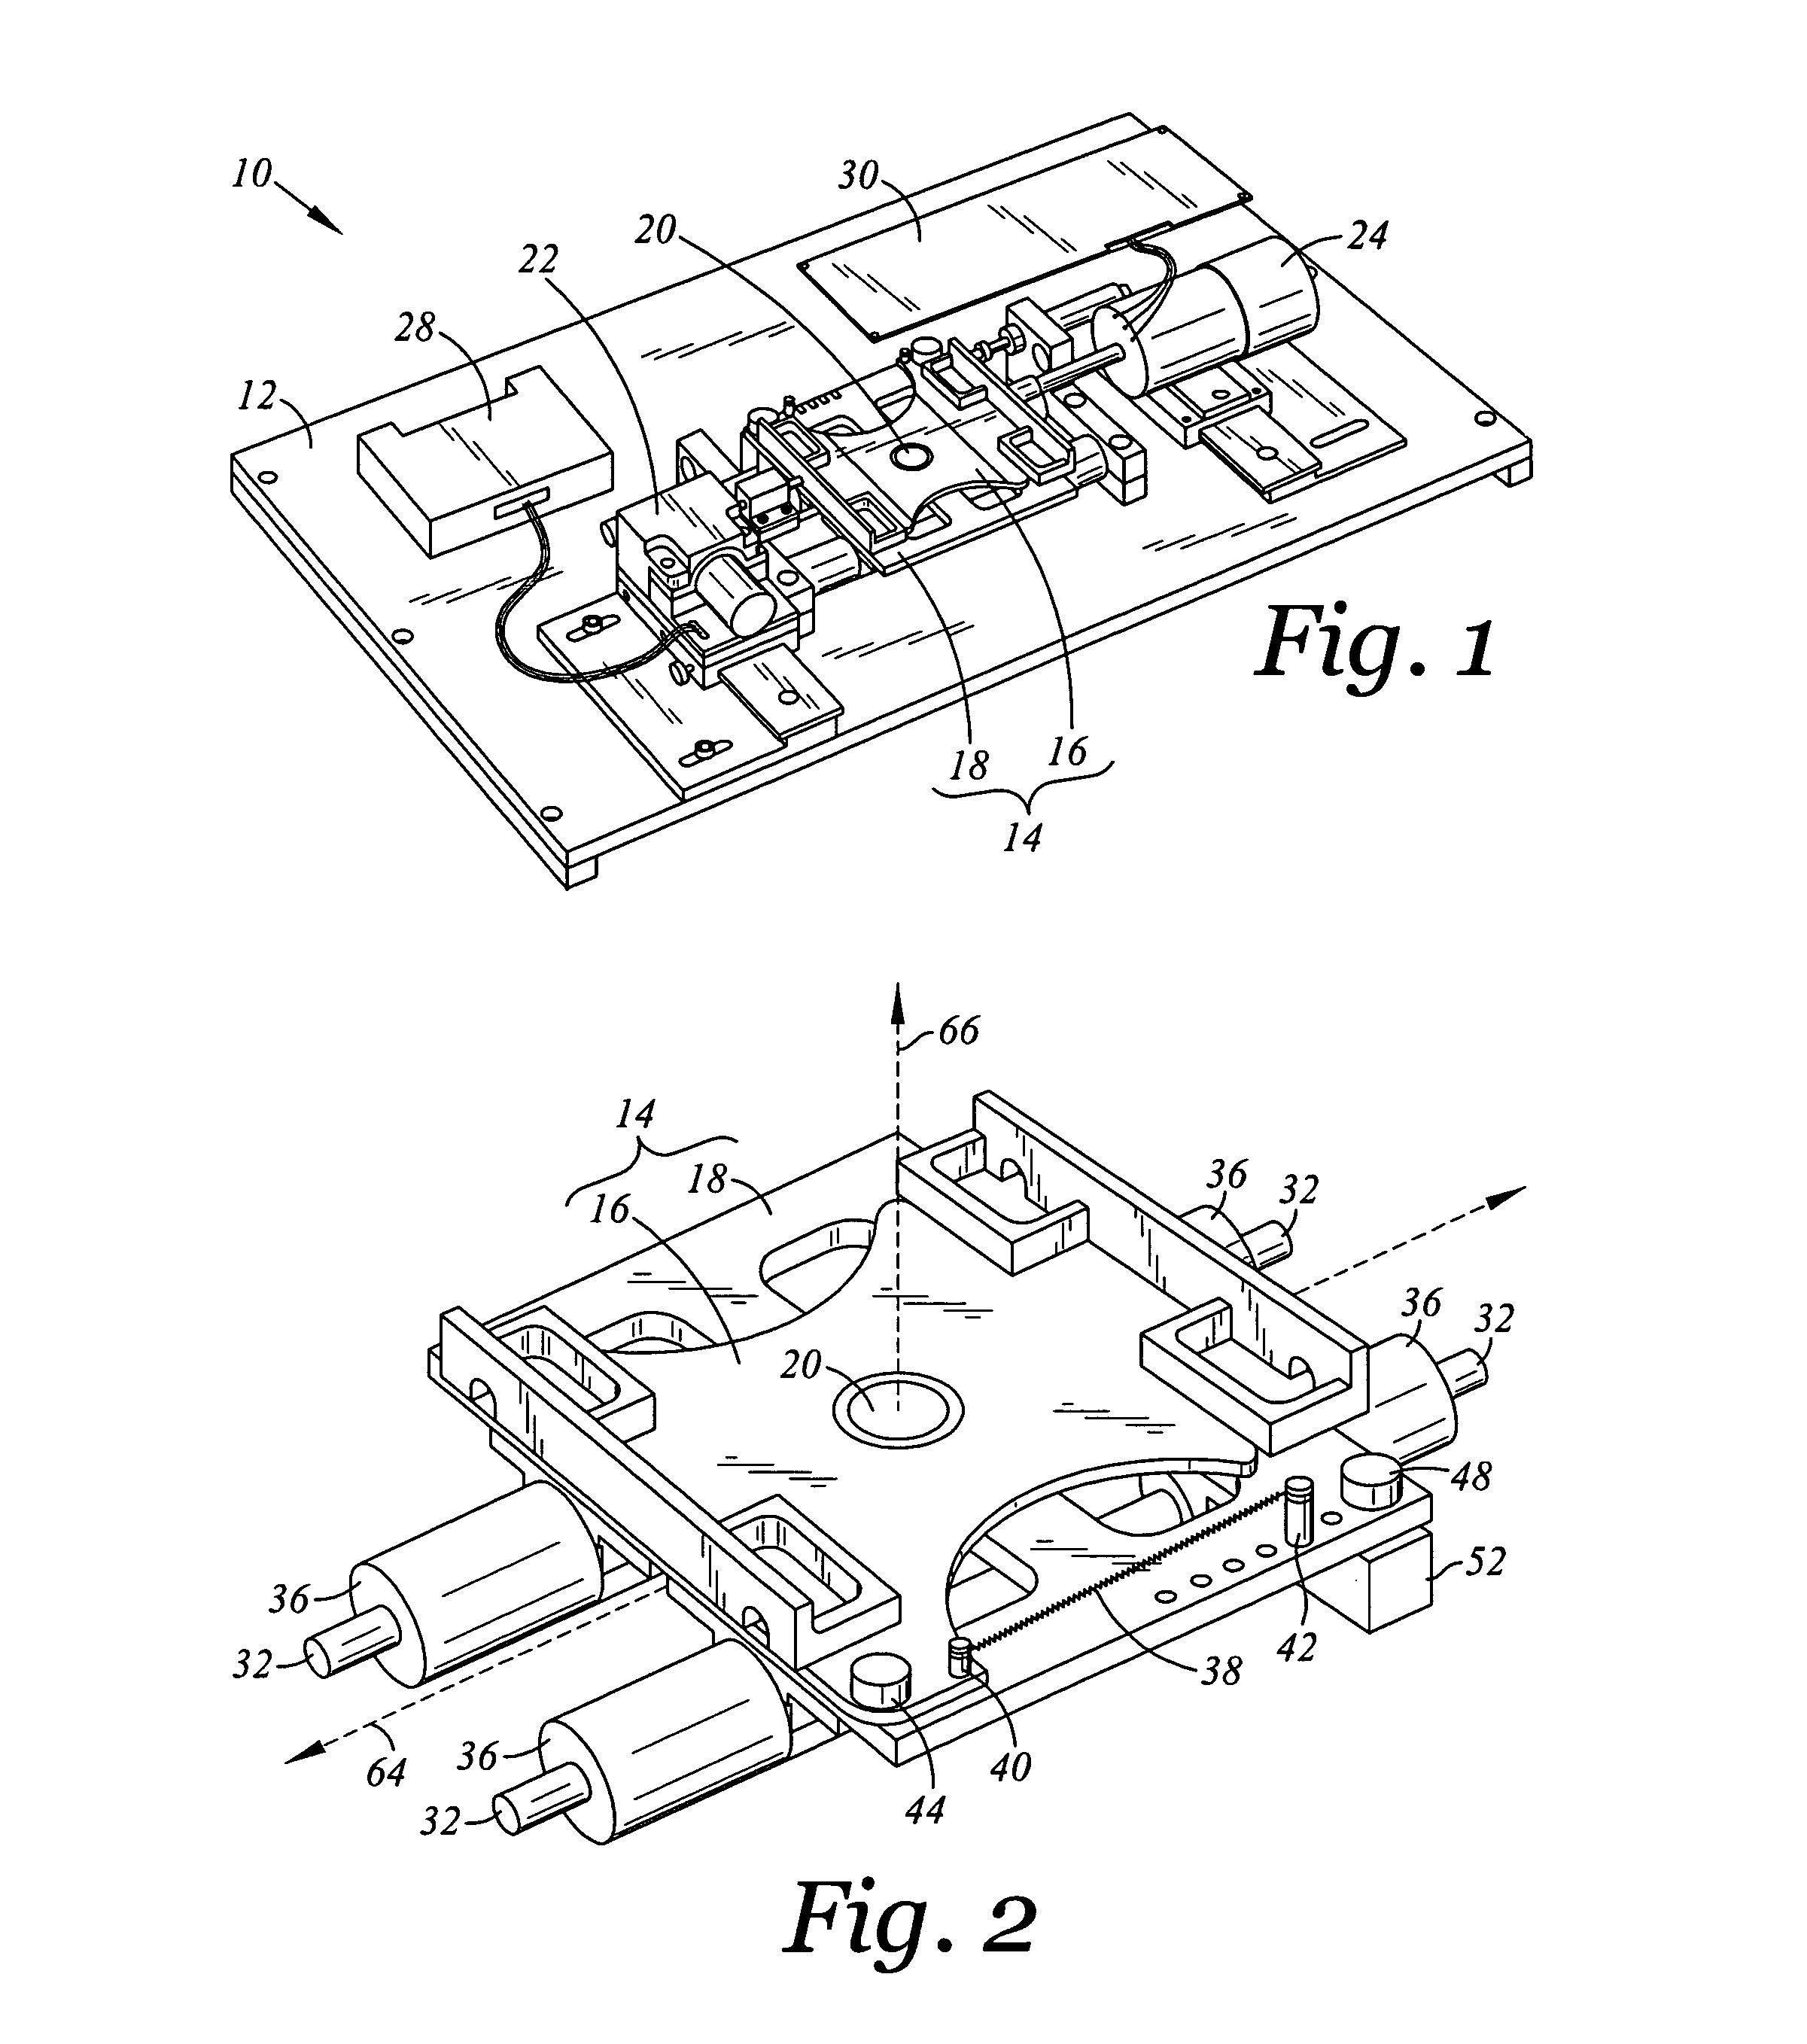 Data storage testing apparatus for delivering linear or rotational acceleration